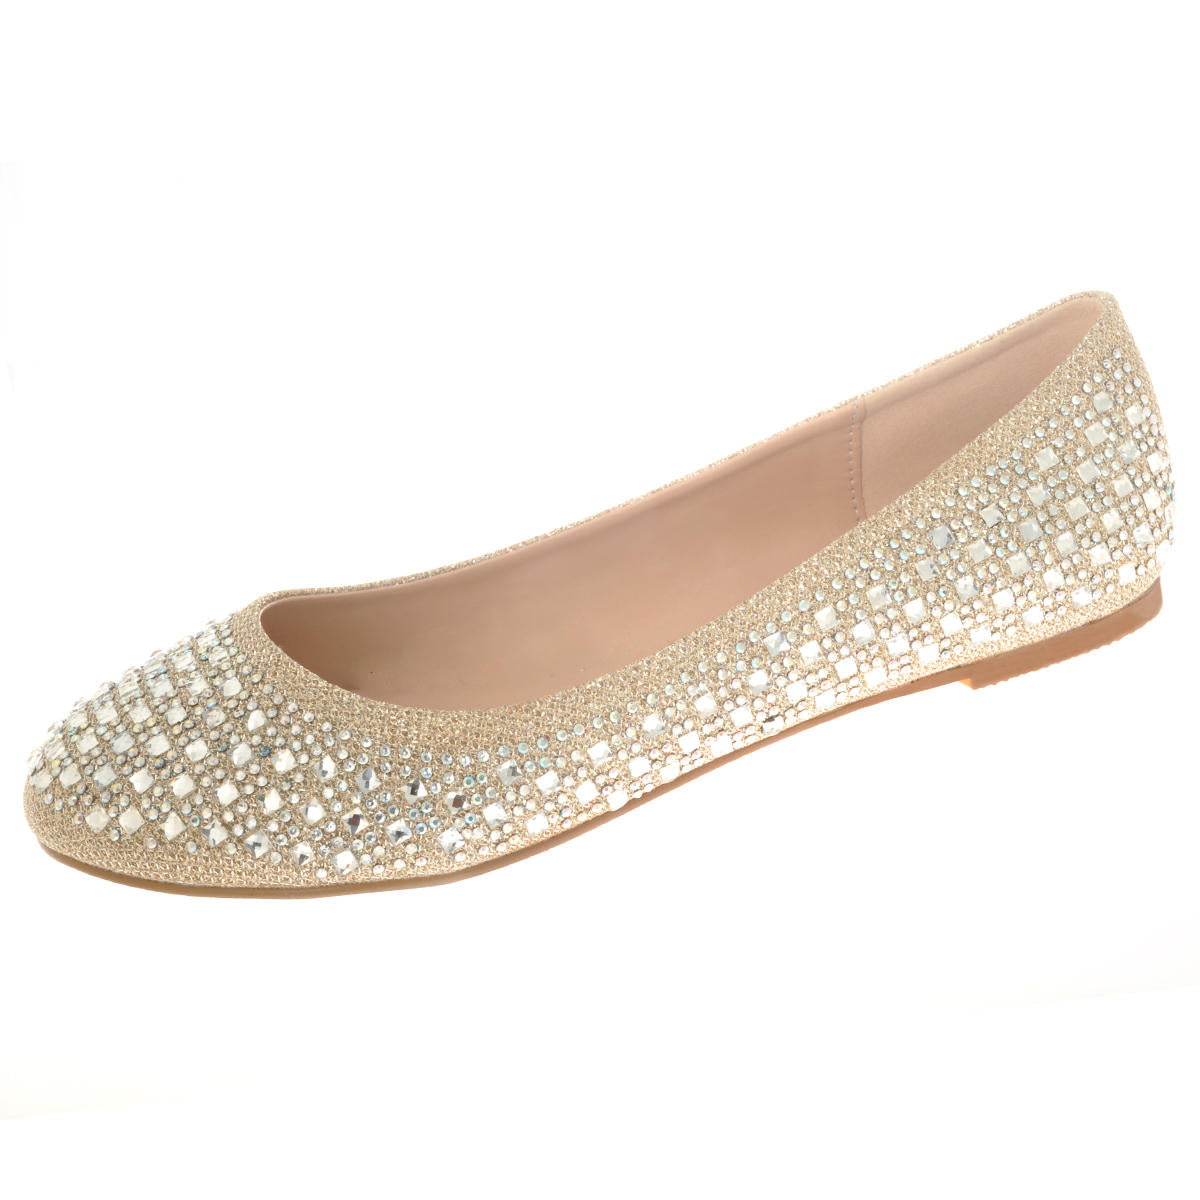 Your Party Shoes Hannah Crystal Embellished Ballet Flat Prom Pageant Formal